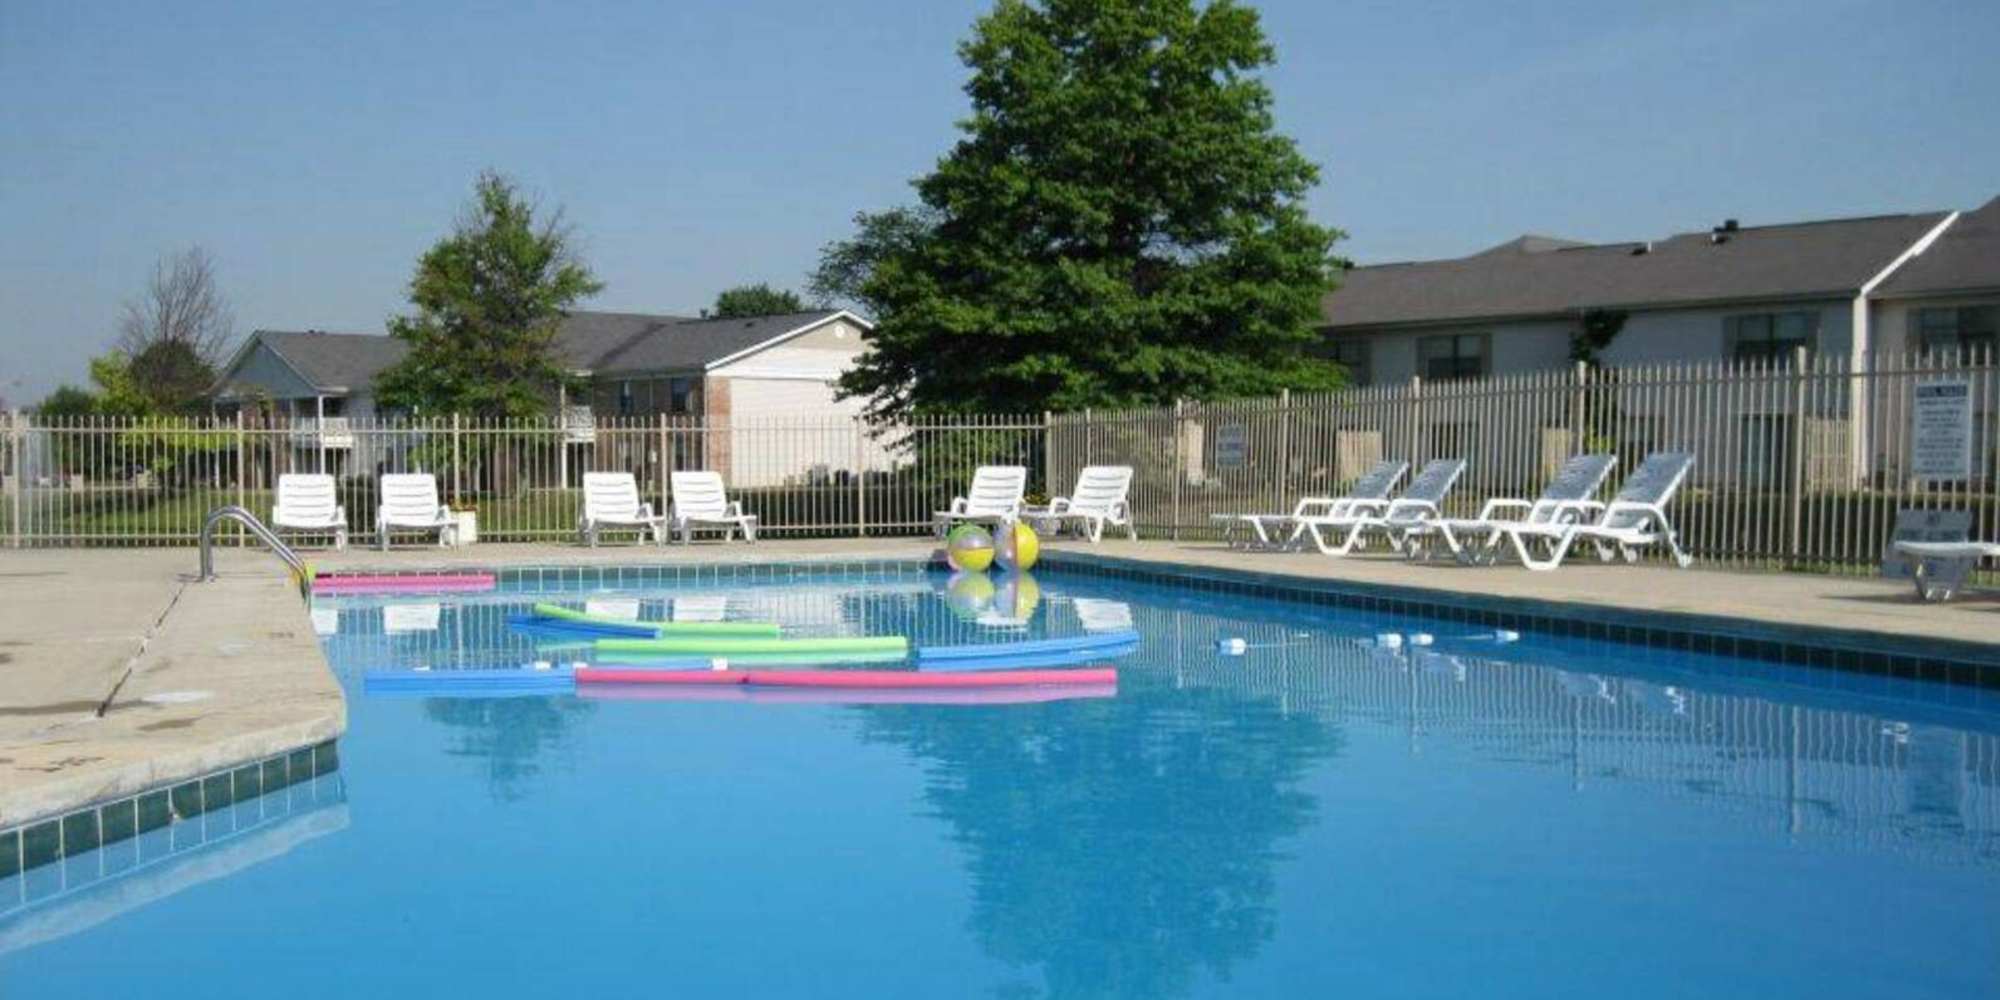 Swimming pool at Castleton Manor Apartments in Indianapolis, Indiana